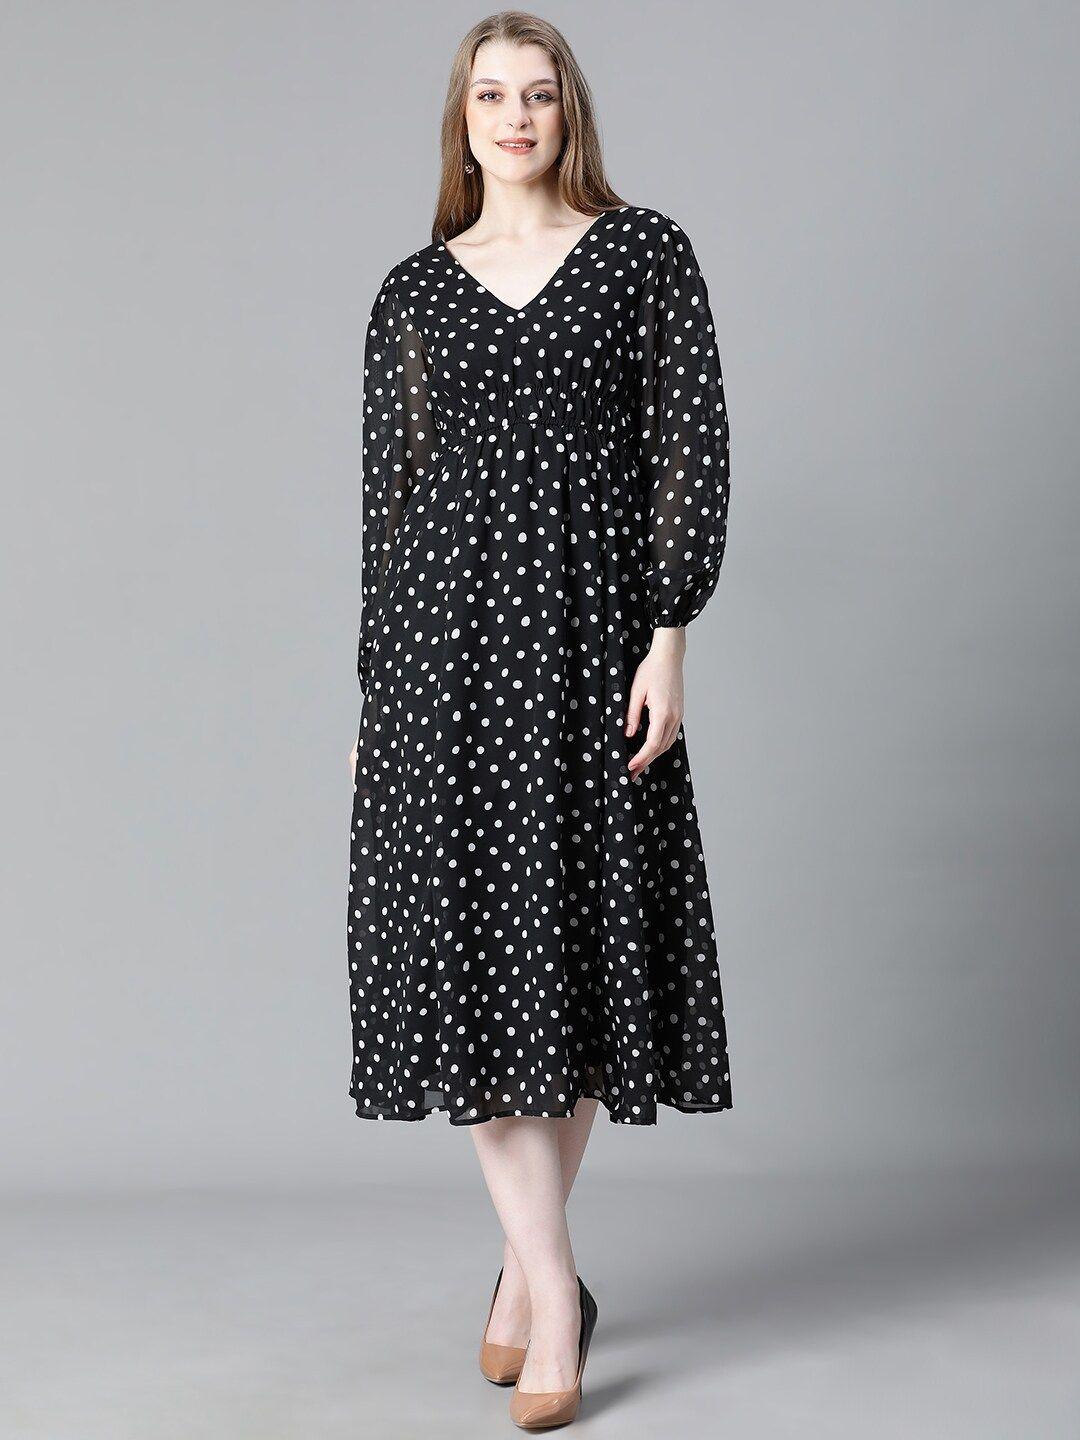 oxolloxo polka dots printed georgette a line dress